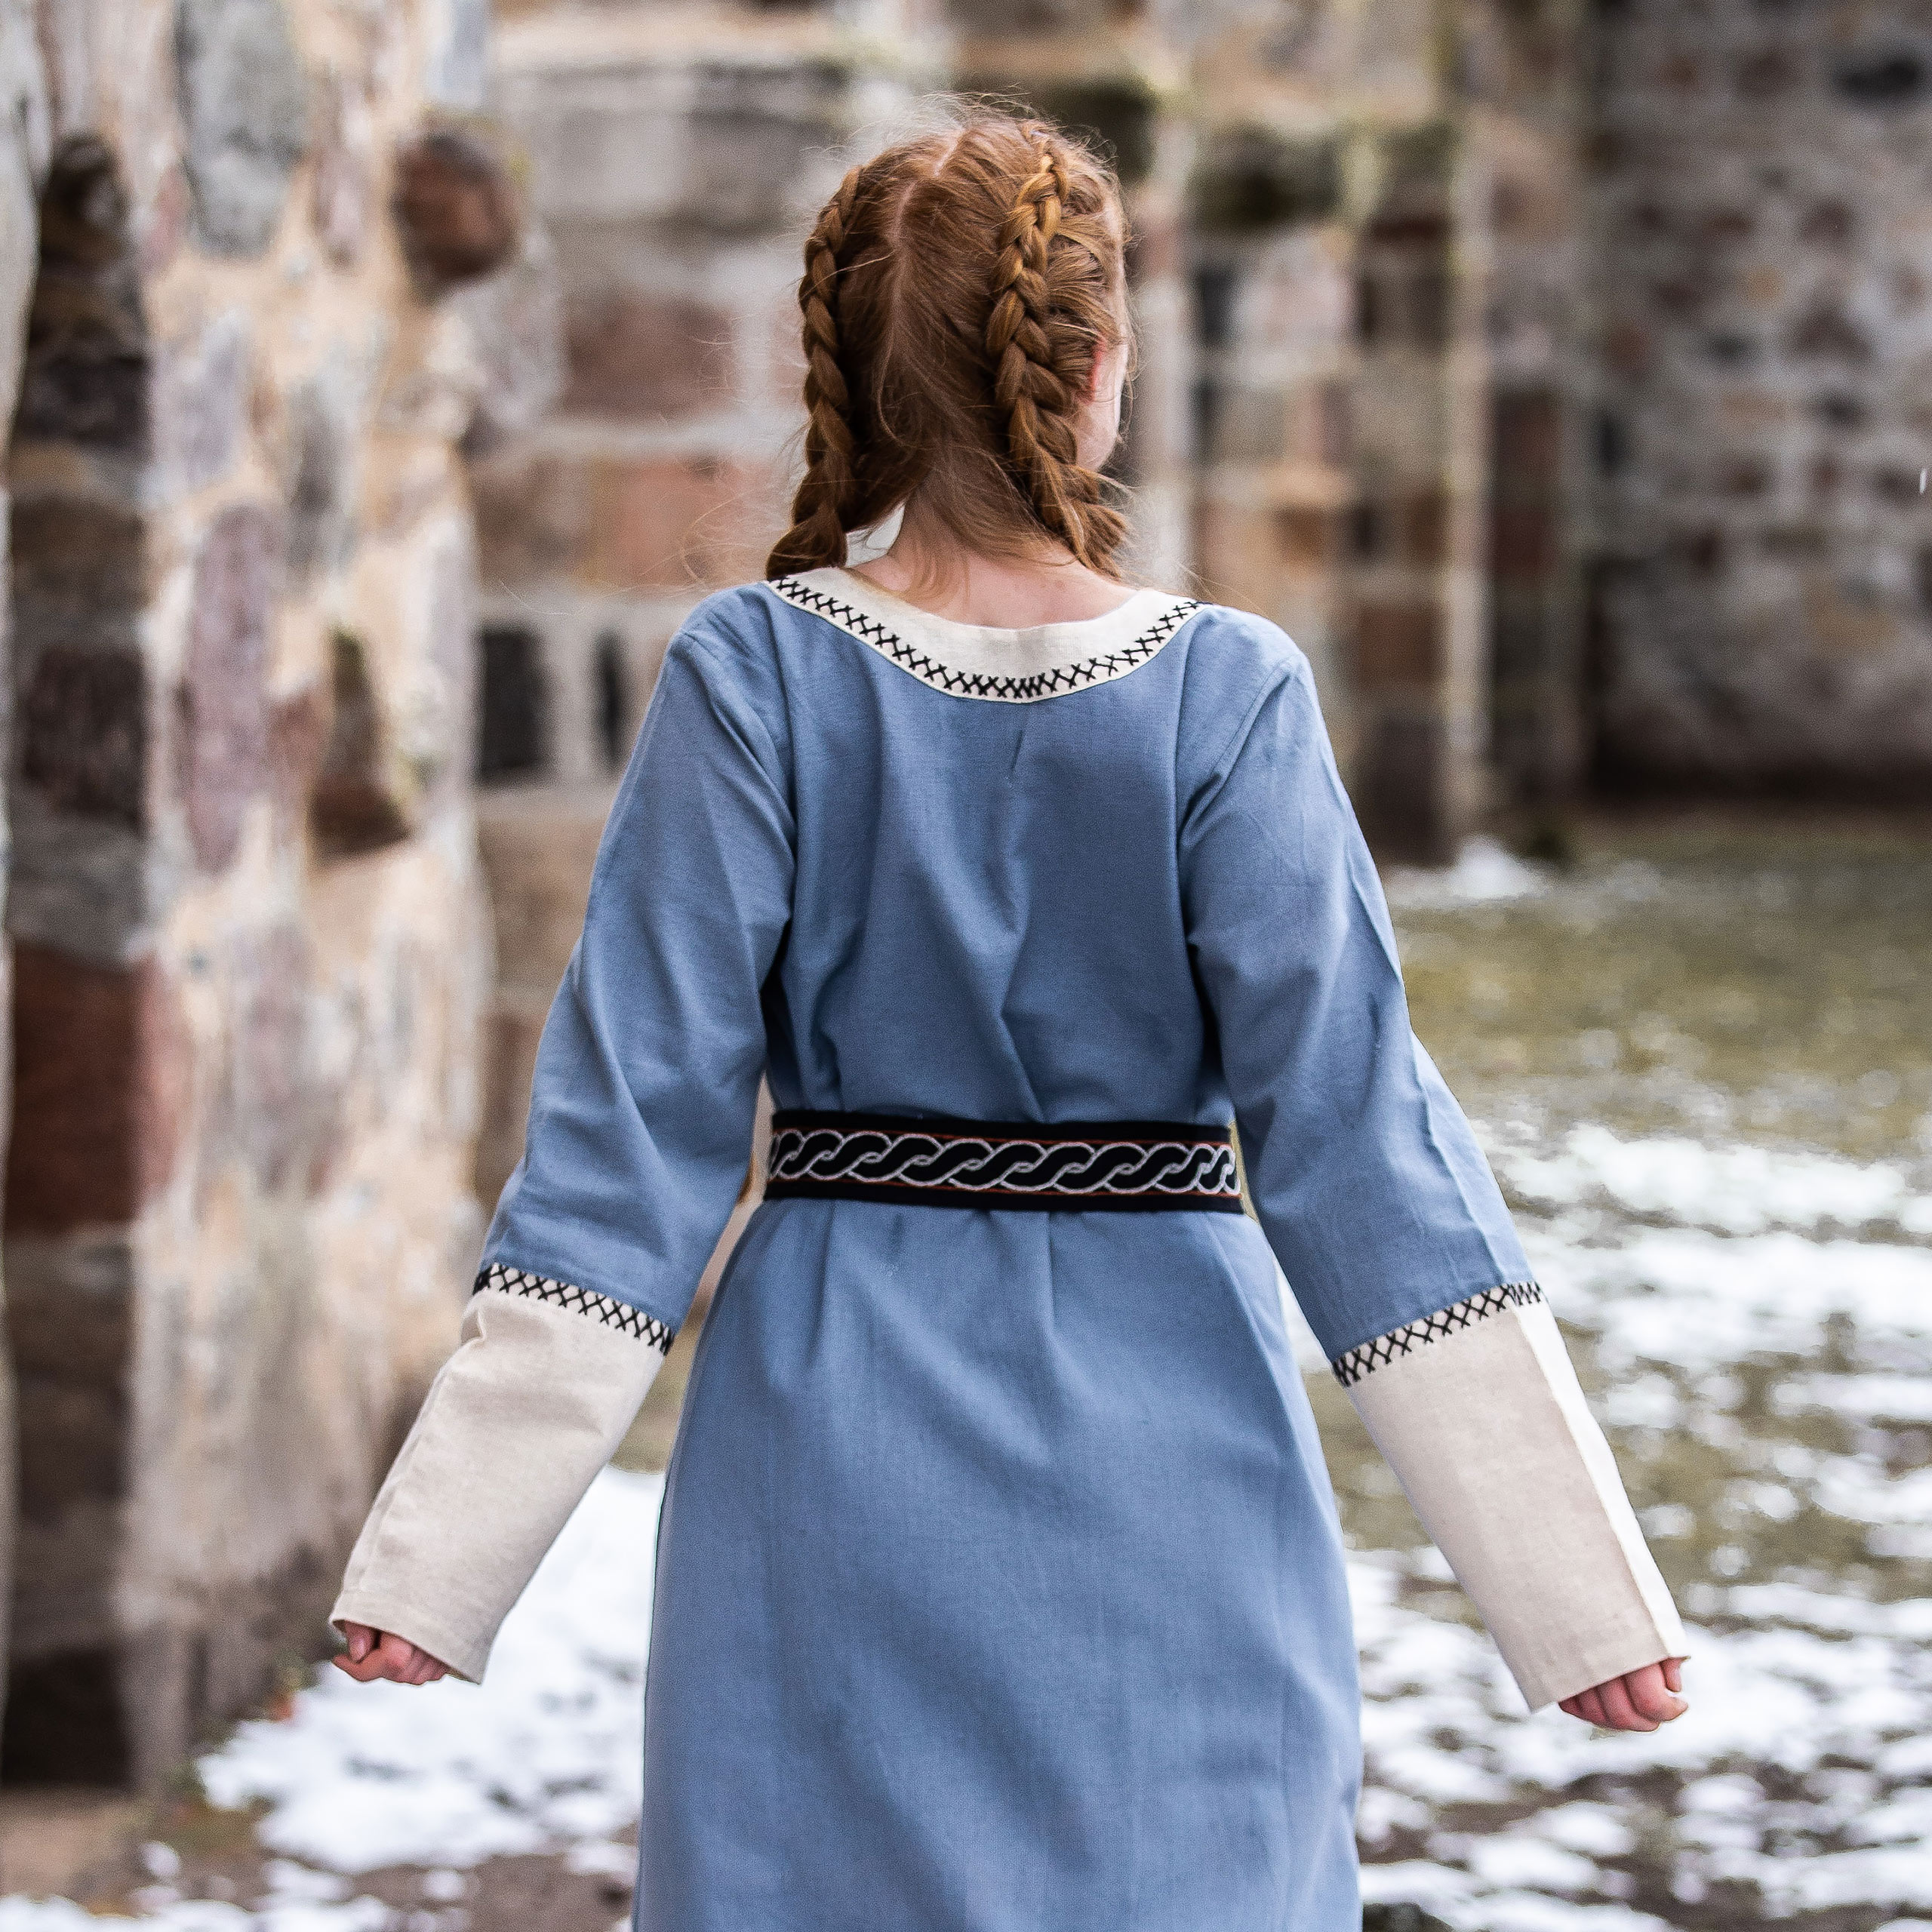 Medieval dress with hand embroidery blue